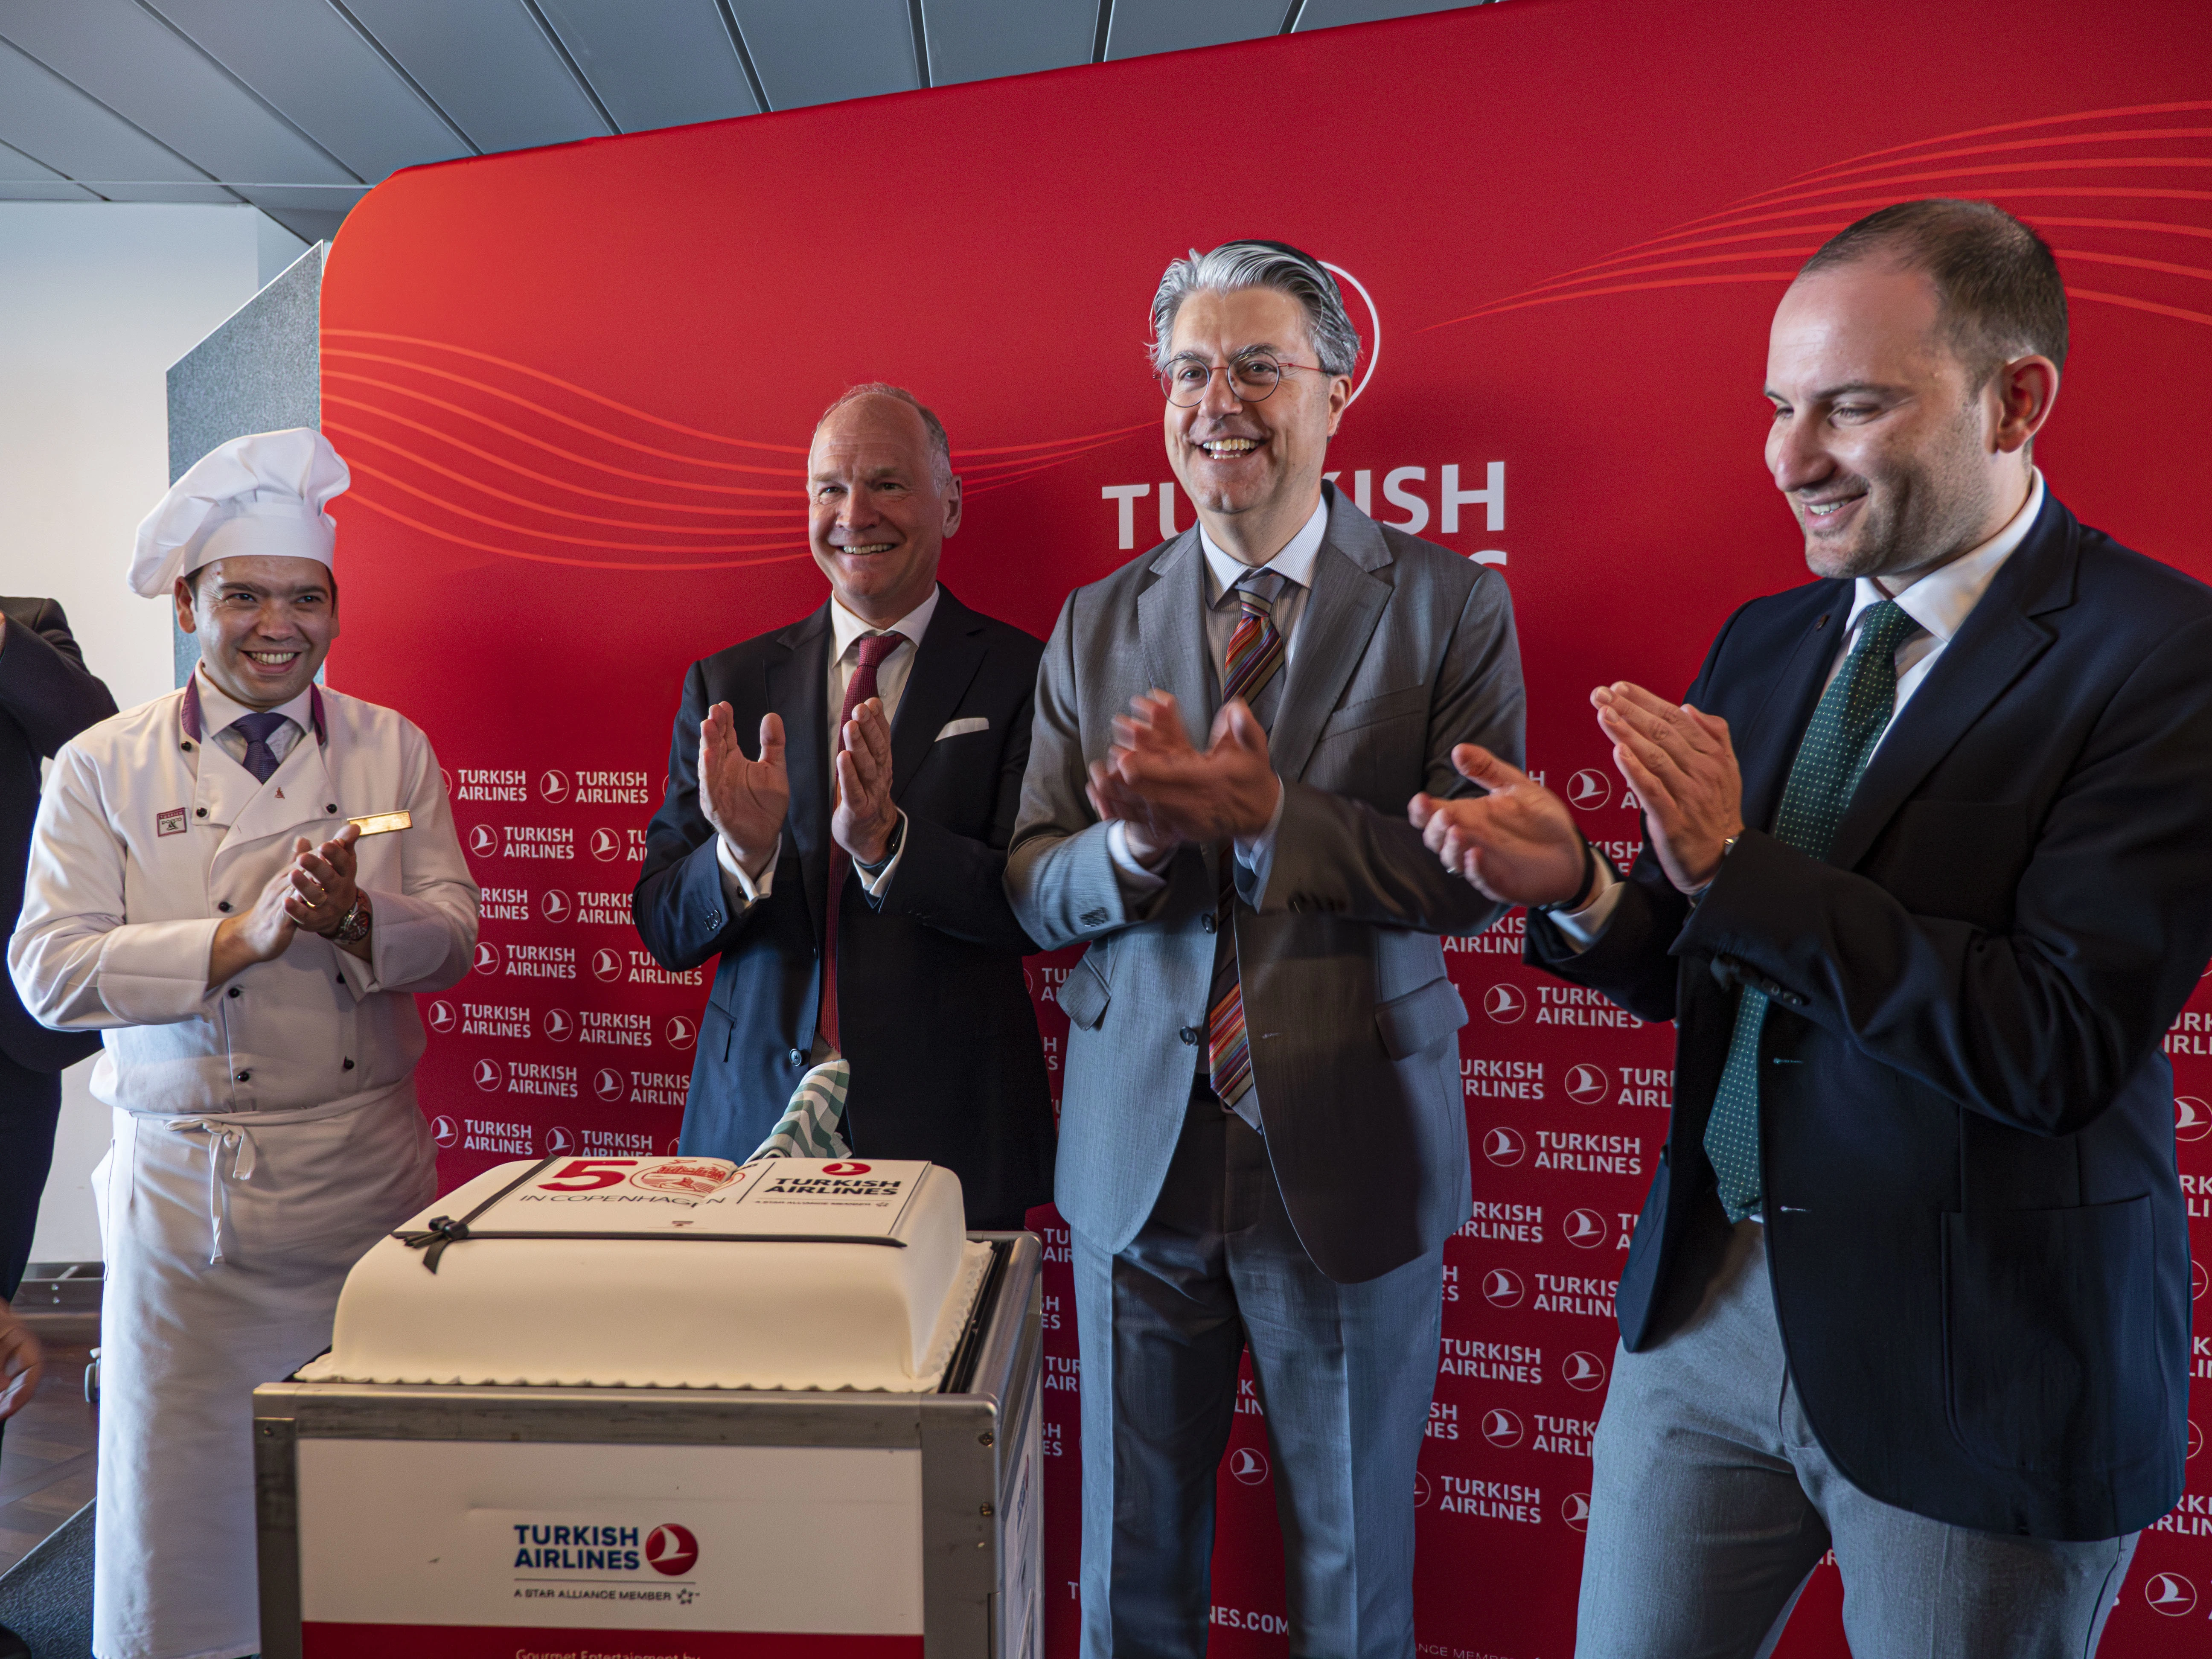 Turkish Airlines Celebrates its 50th anniversary at CPH